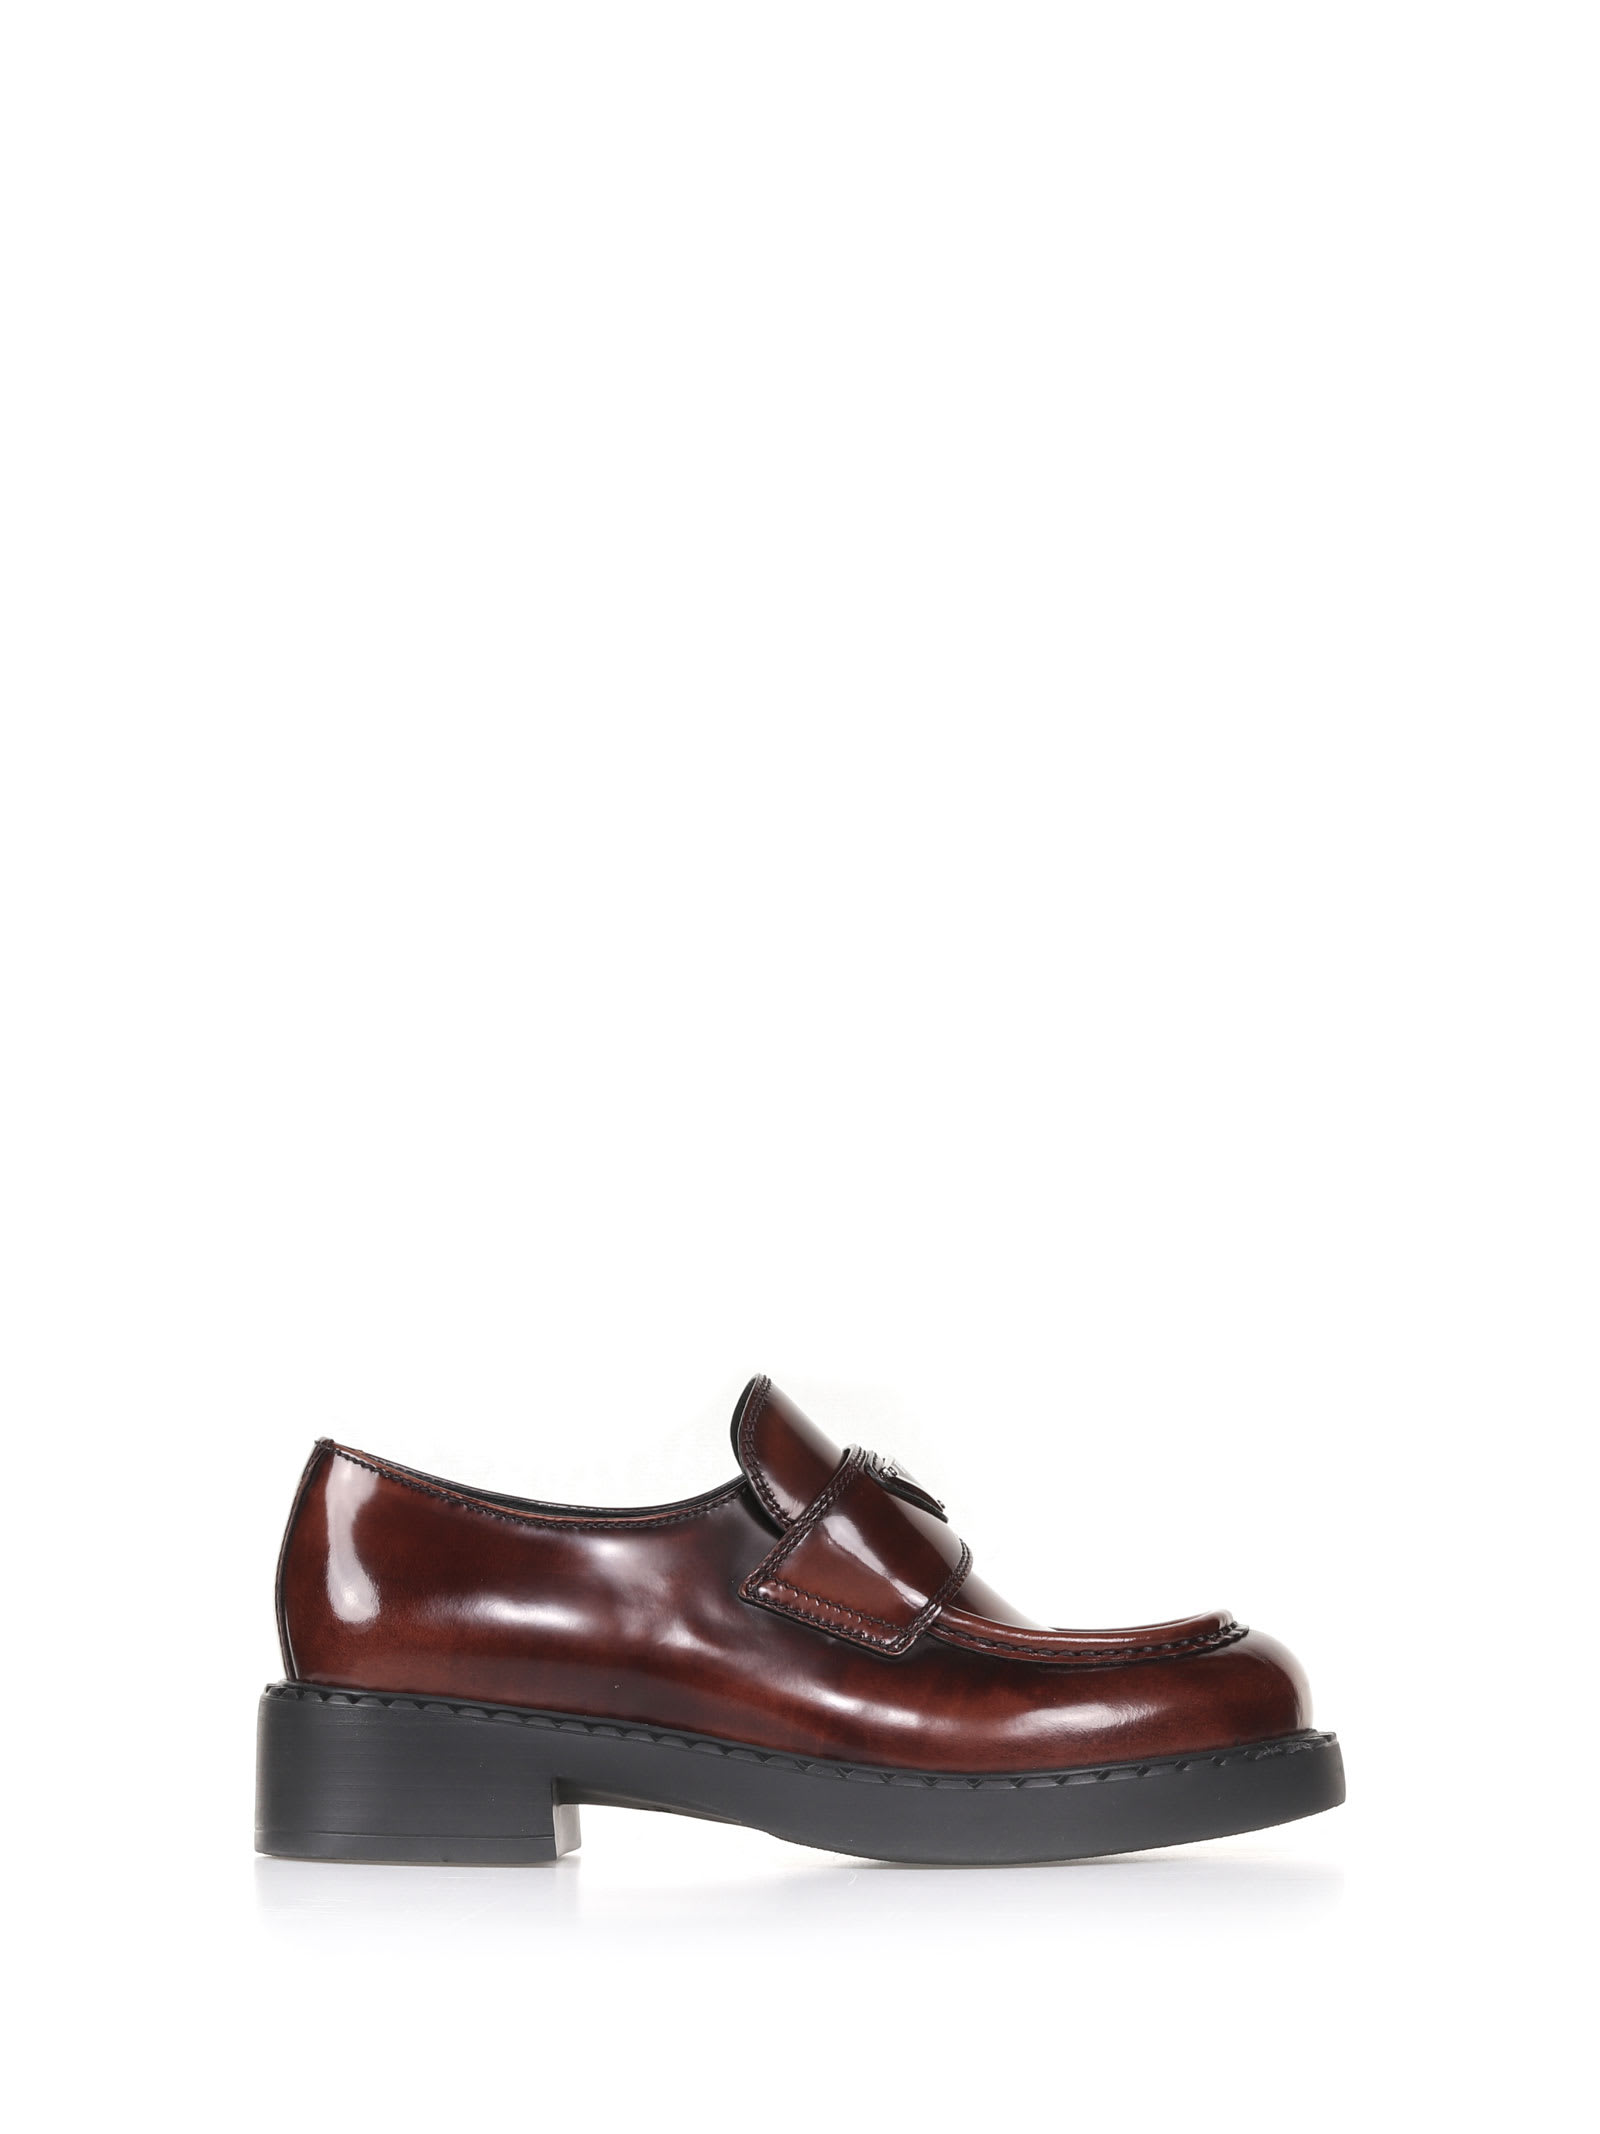 PRADA LOAFER IN BRUSHED LEATHER,1D246M F B050 X6OF0005